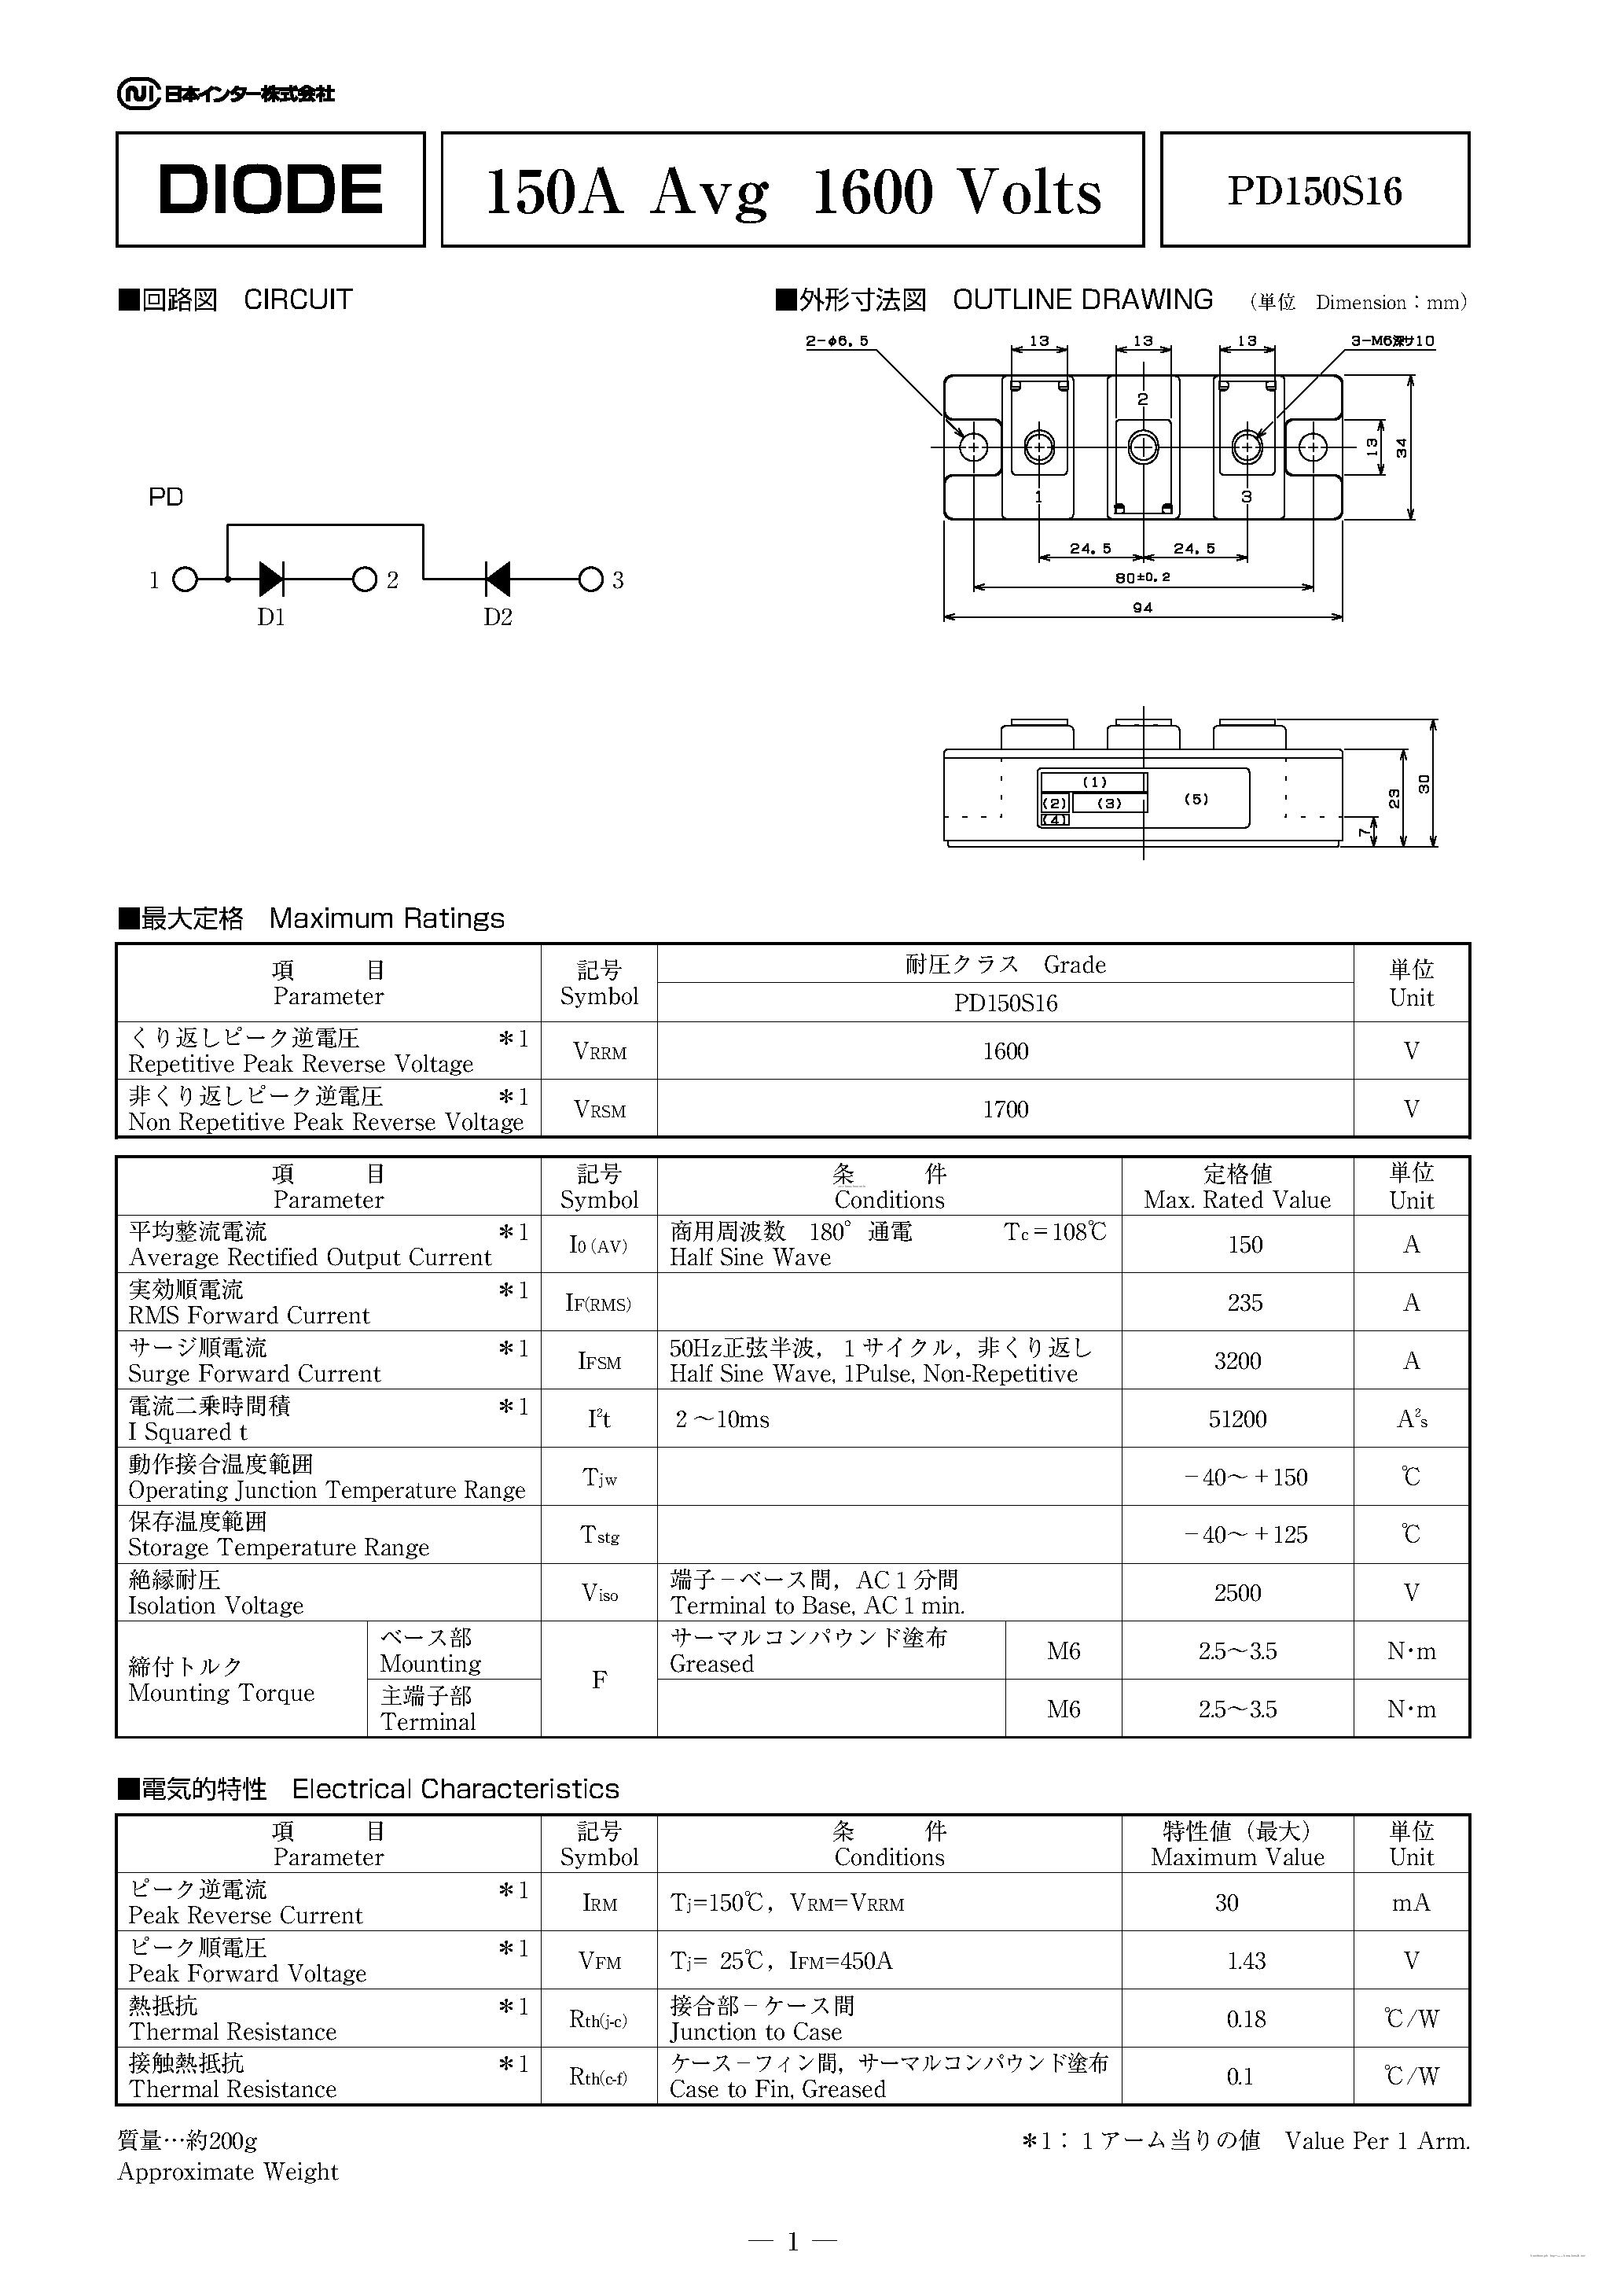 Datasheet PD150S16 - DIODE page 1